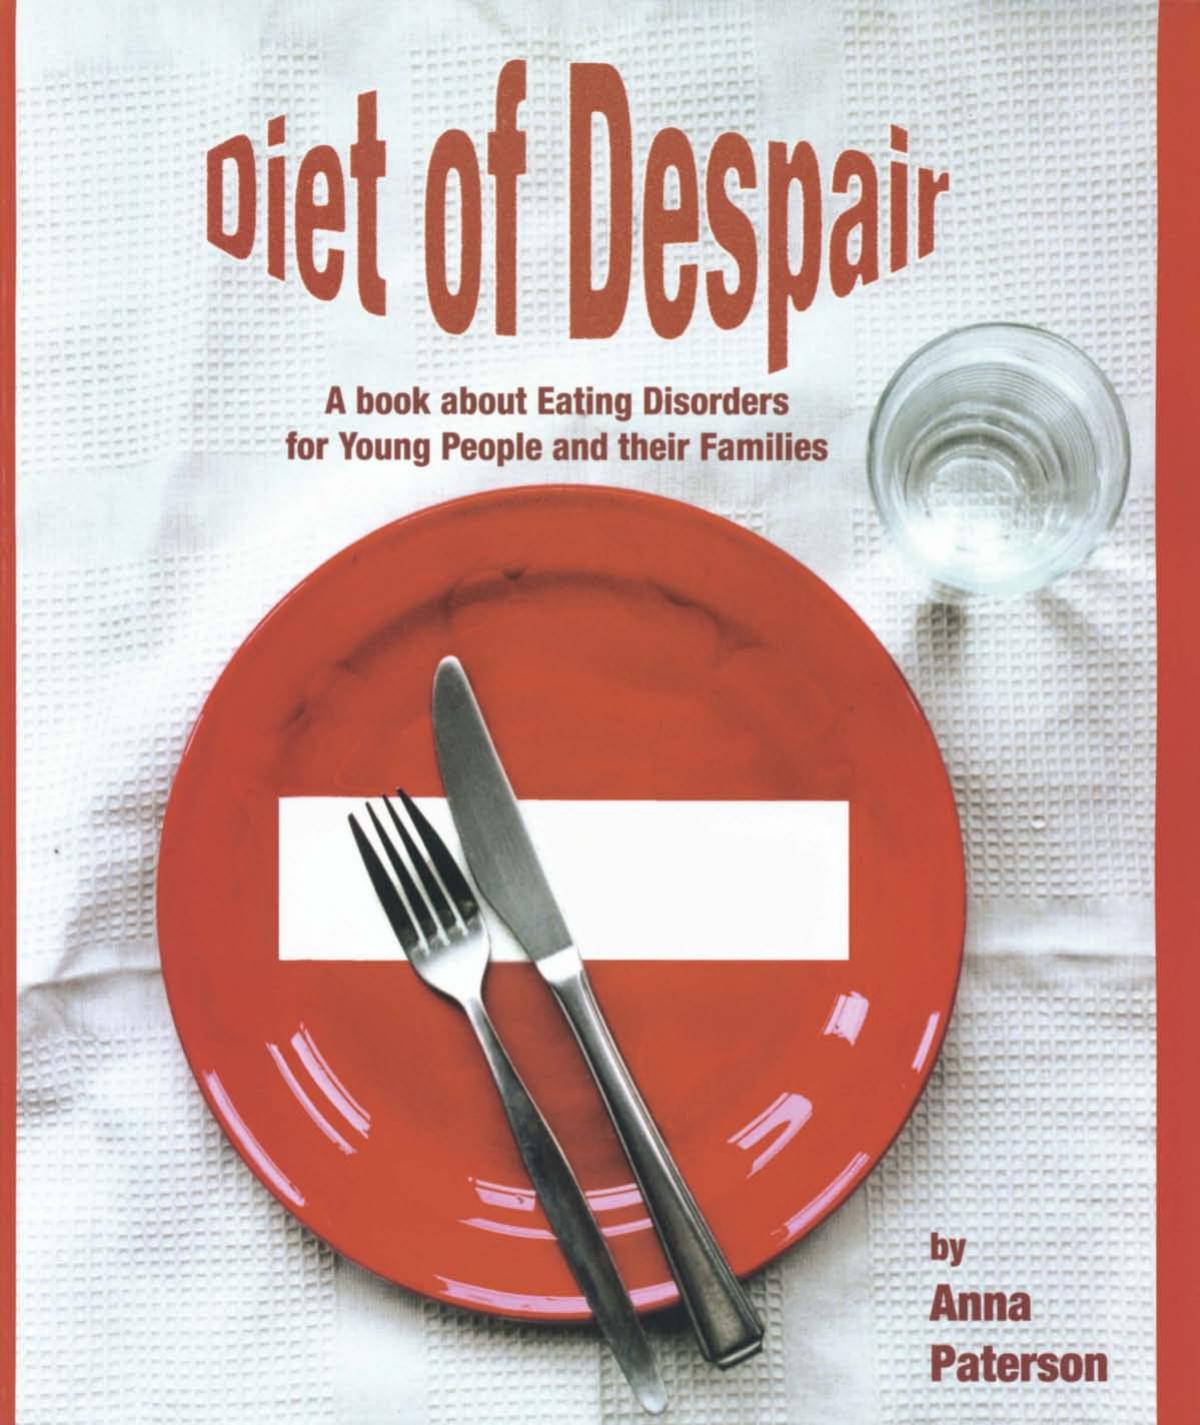 Diet of Despair : A Book about Eating Disorders for Young People and Their Families by Anna Paterson